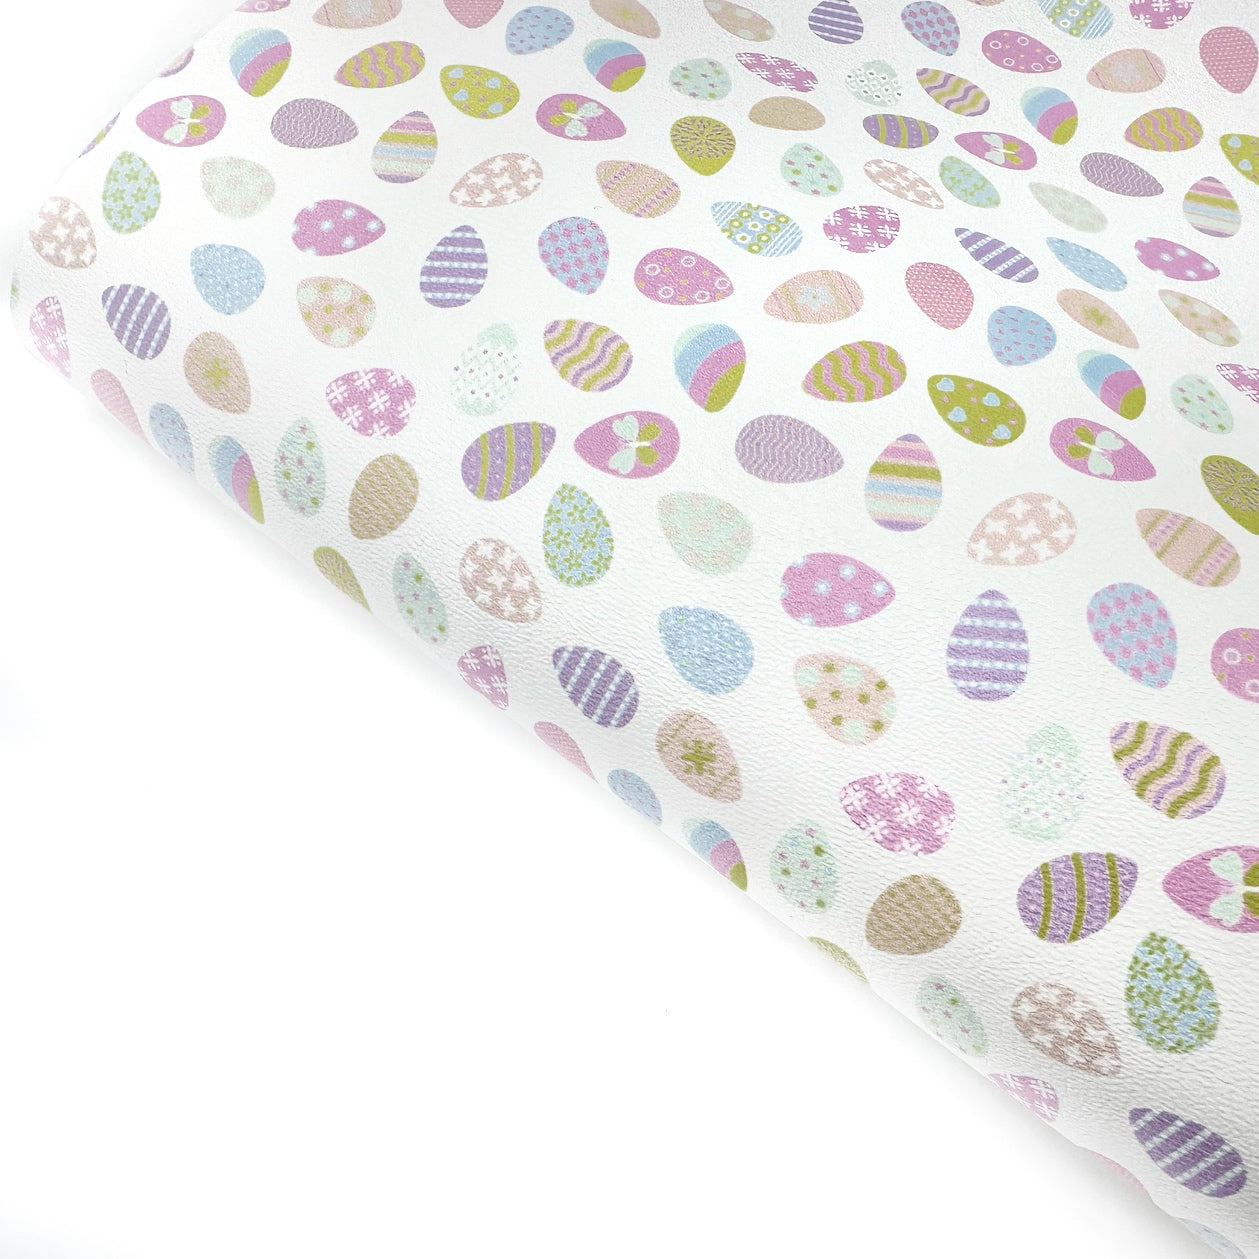 Easter Egg Hunt Premium Faux Leather Fabric Sheets